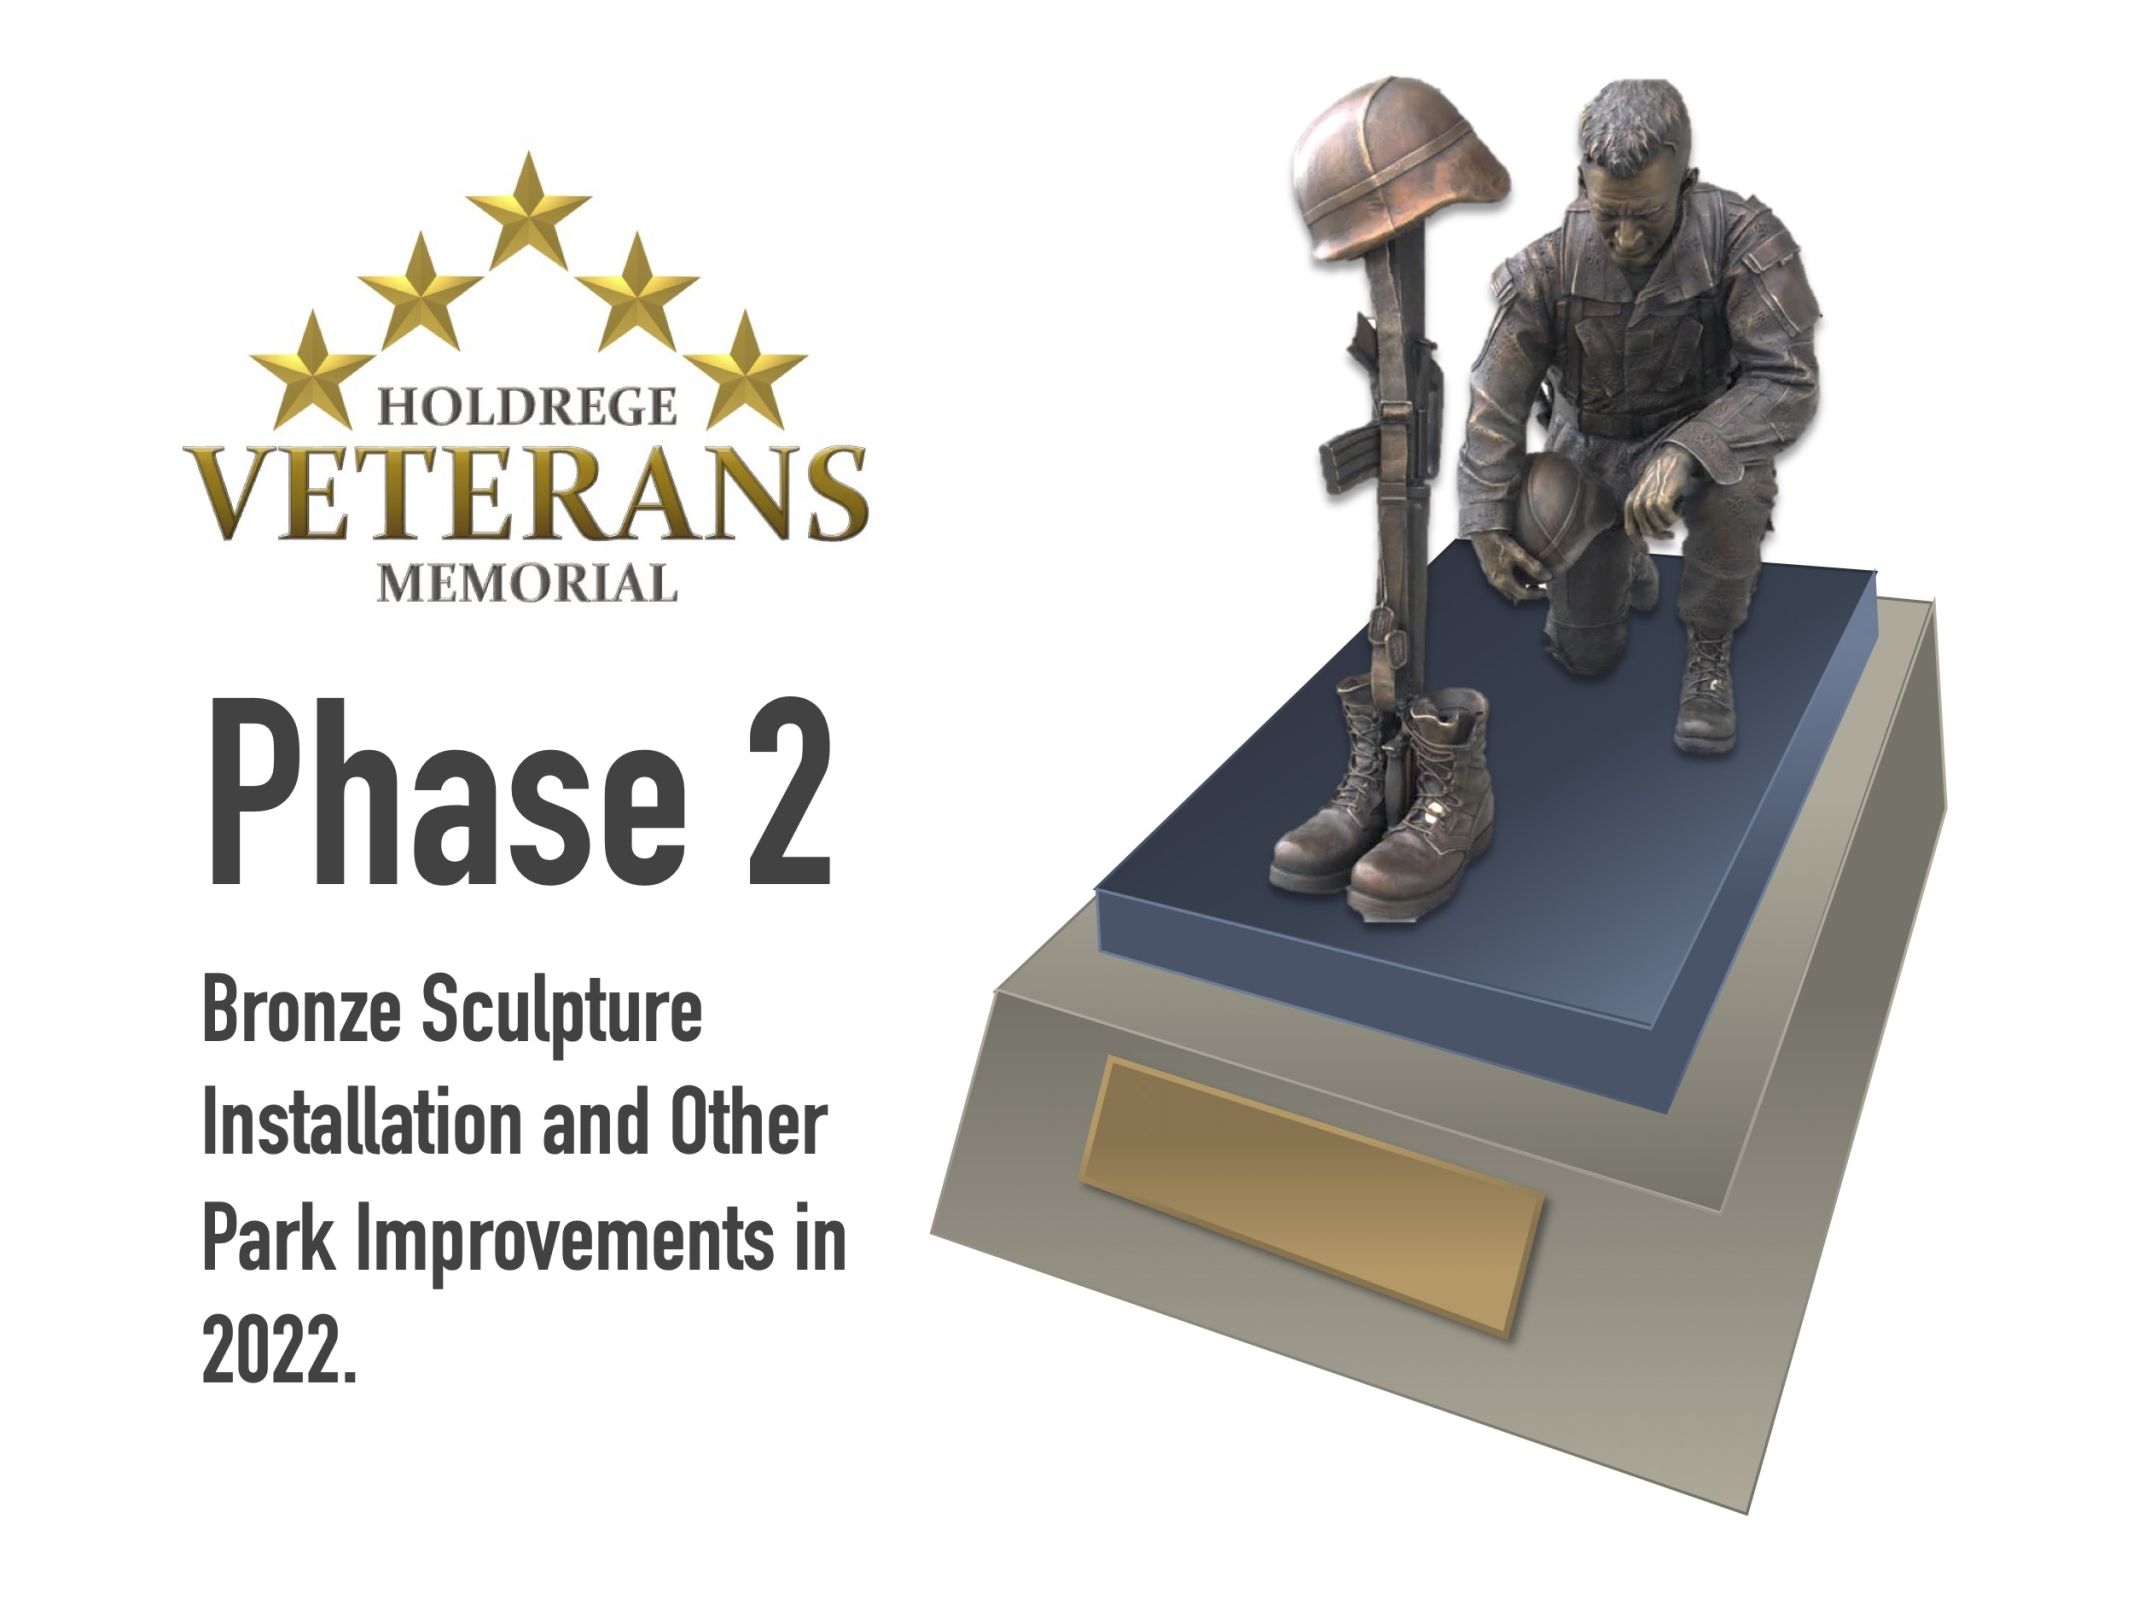 Sculpture Dedication Ceremony Planned for Veterans Day Main Photo